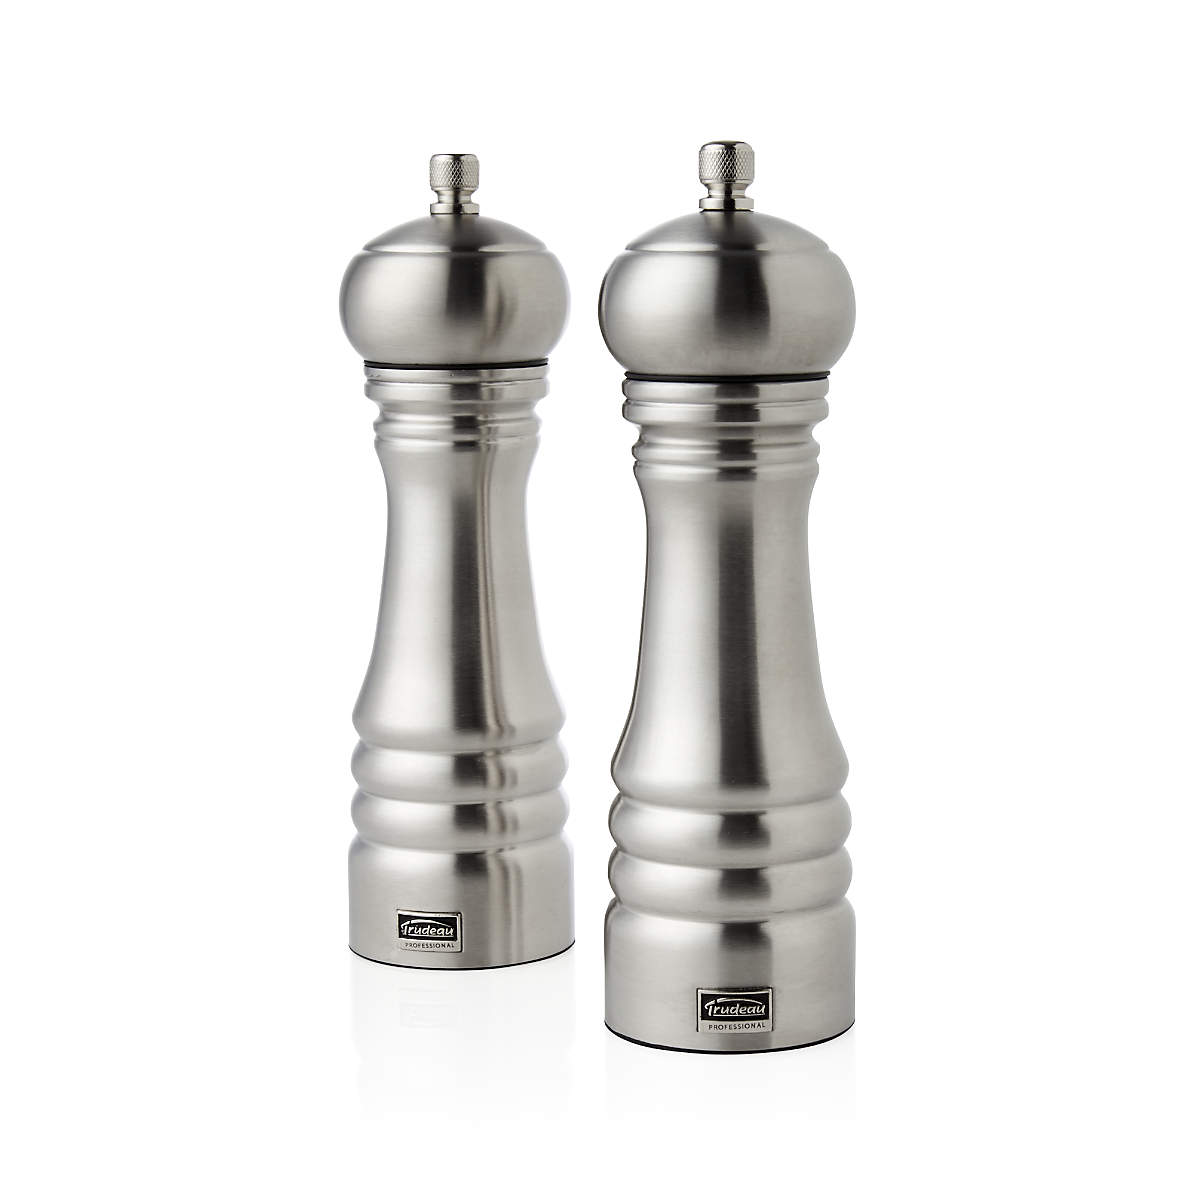 Salt and Pepper Grinder Set - Stainless Steel Pepper Grinder and Salt  Grinder with Tray in Luxurious Gift-Box - Manual Mills with Ceramic  Grinders and